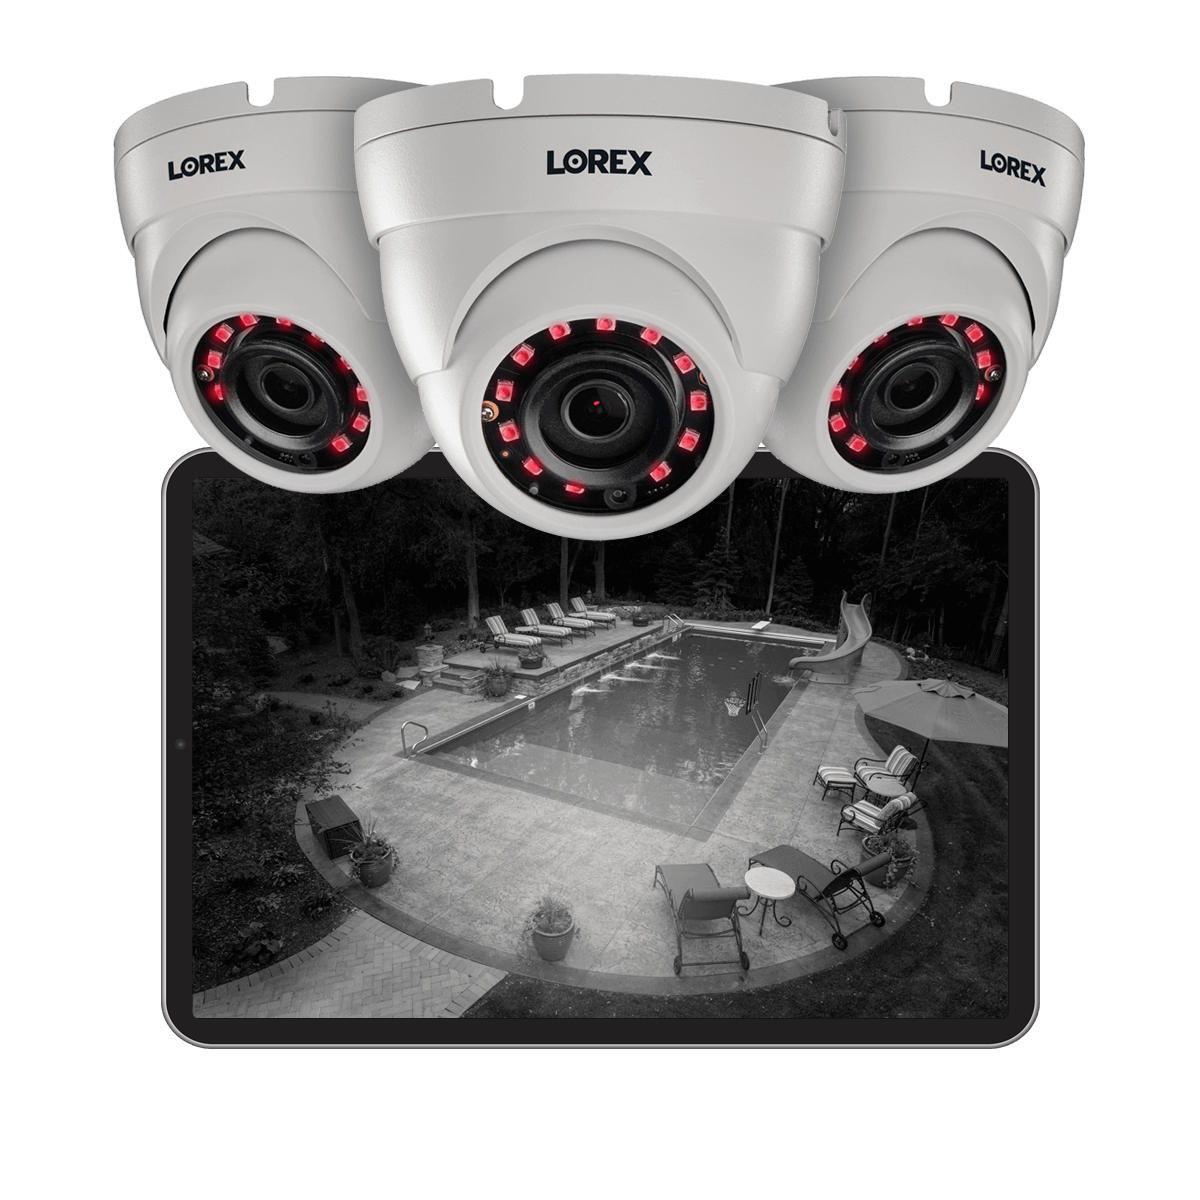 HD night vision bullet and dome security cameras for 24/7 security coverage